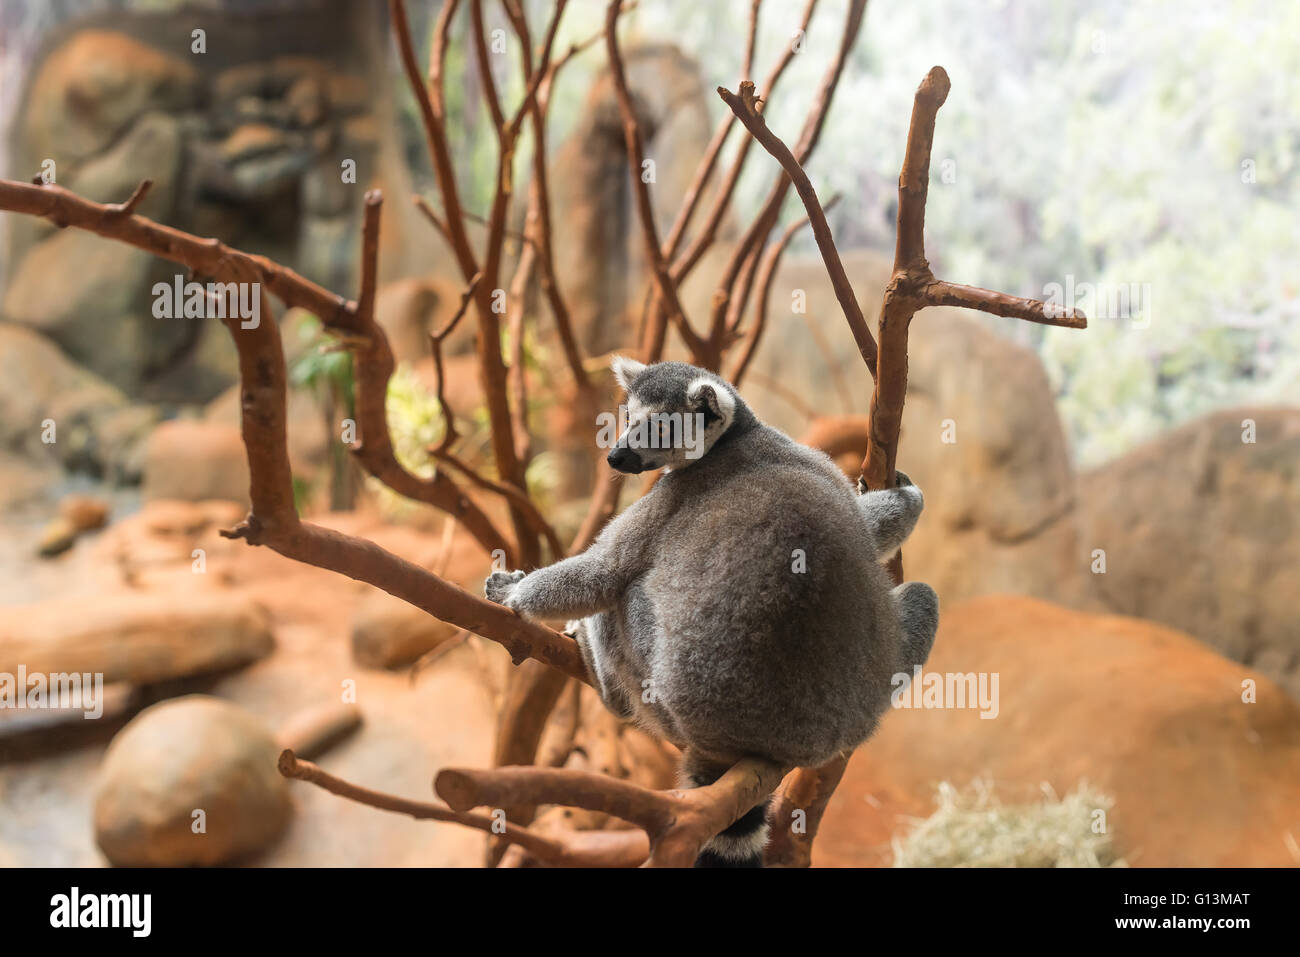 The ring tailed lemur (lemur catta) eating and sitting by a tree. Stock Photo